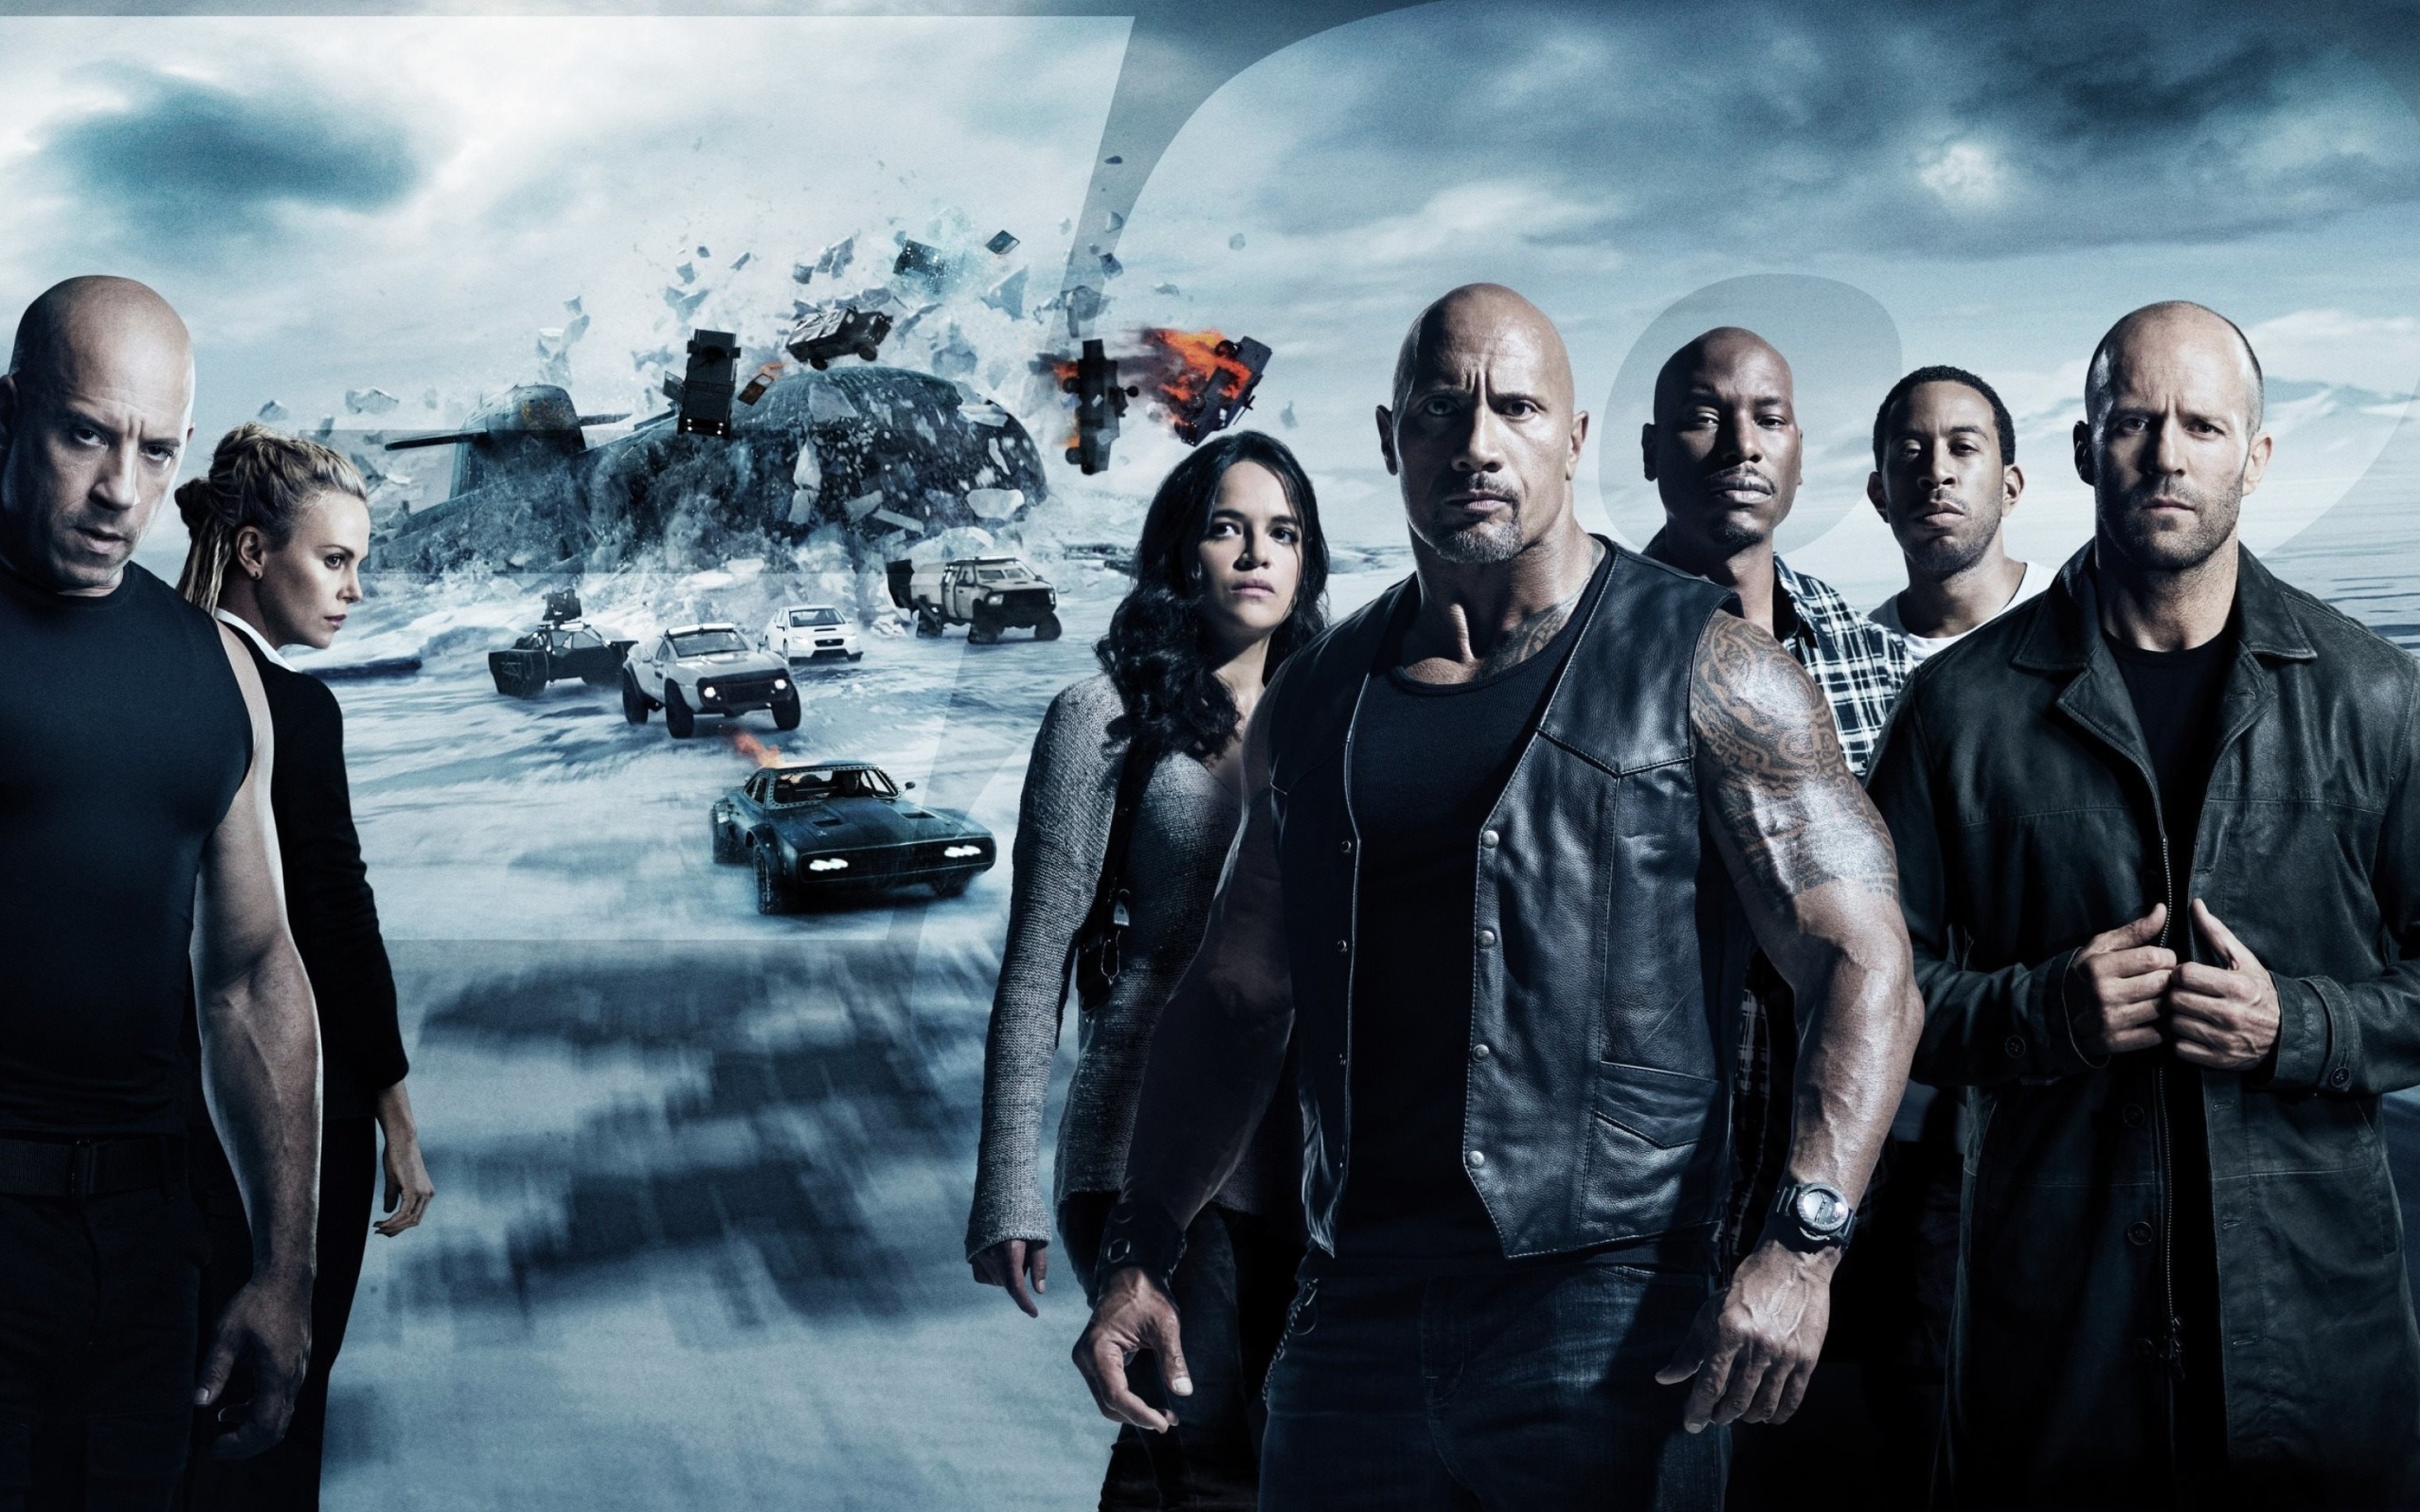 Sfondi The Fate of the Furious with Vin Diesel, Dwayne Johnson, Charlize Theron 2560x1600